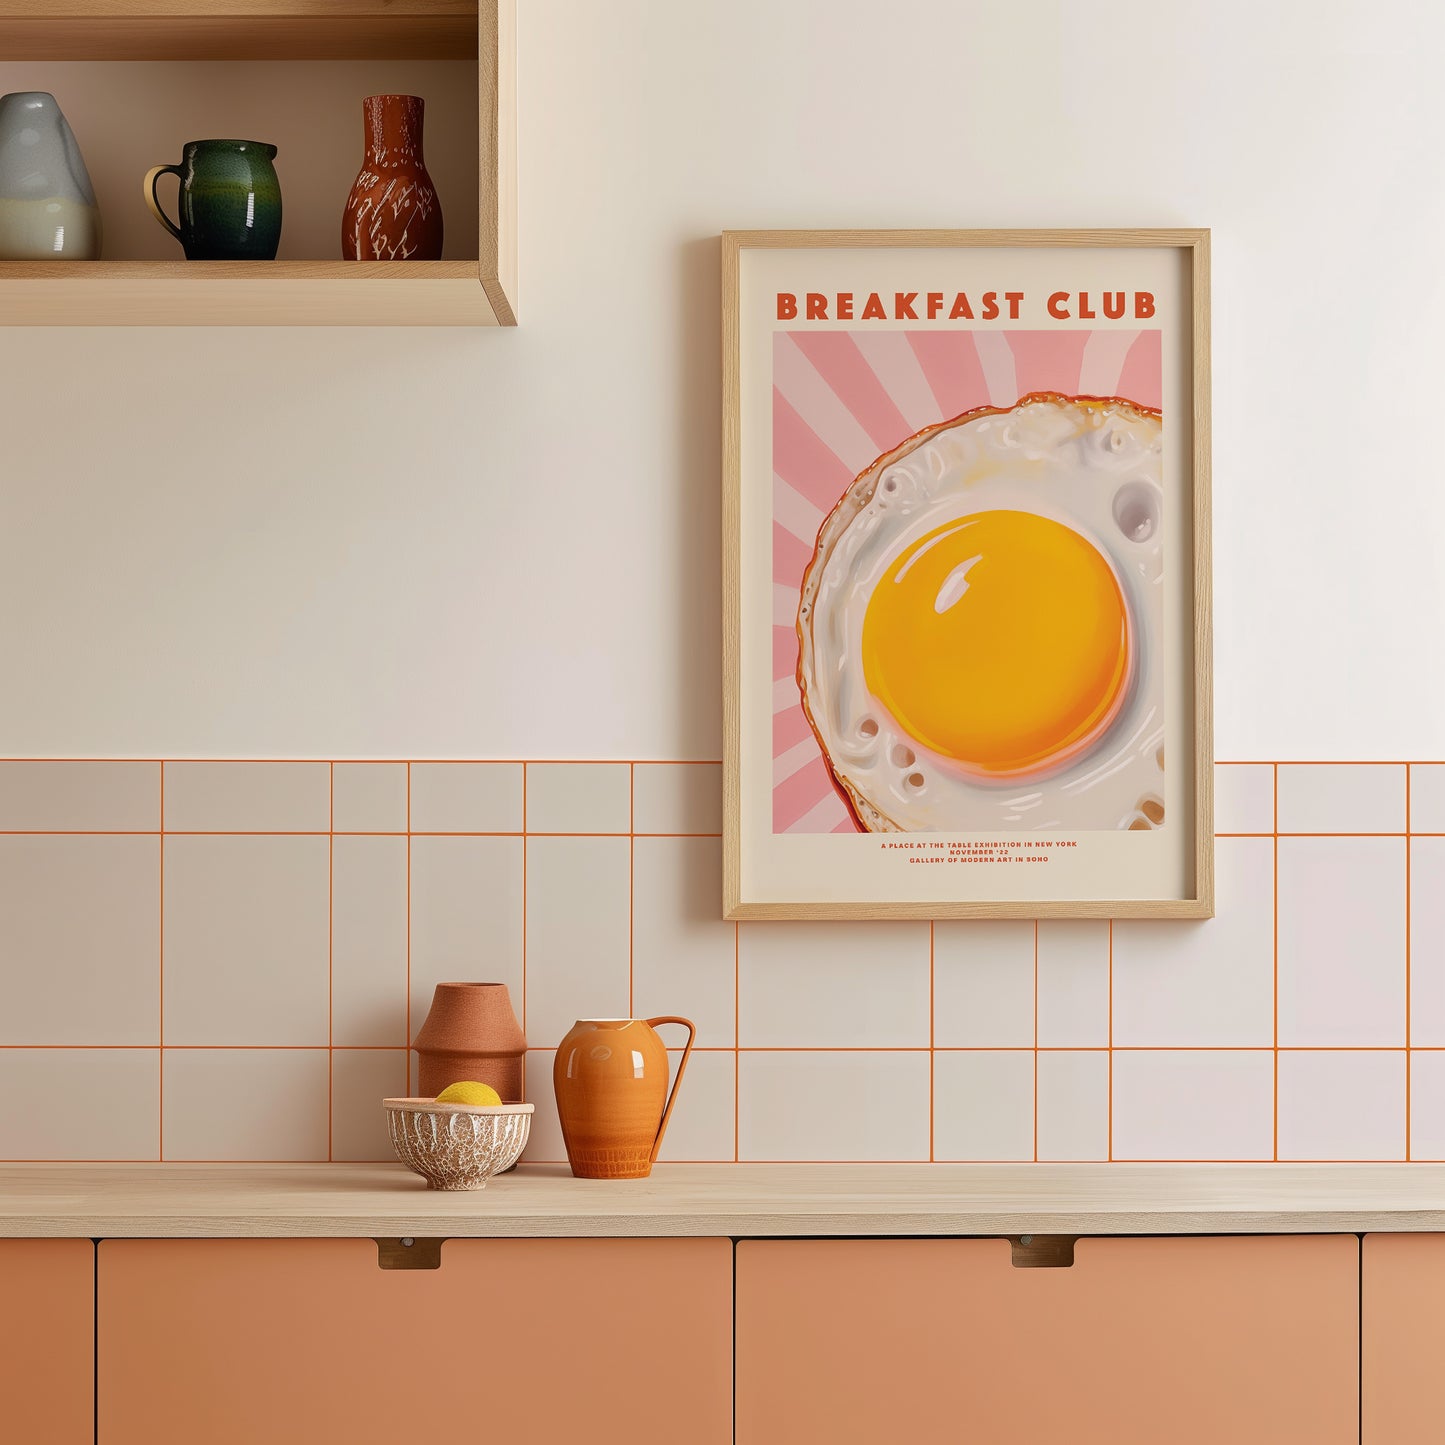 a picture of a breakfast club on a wall